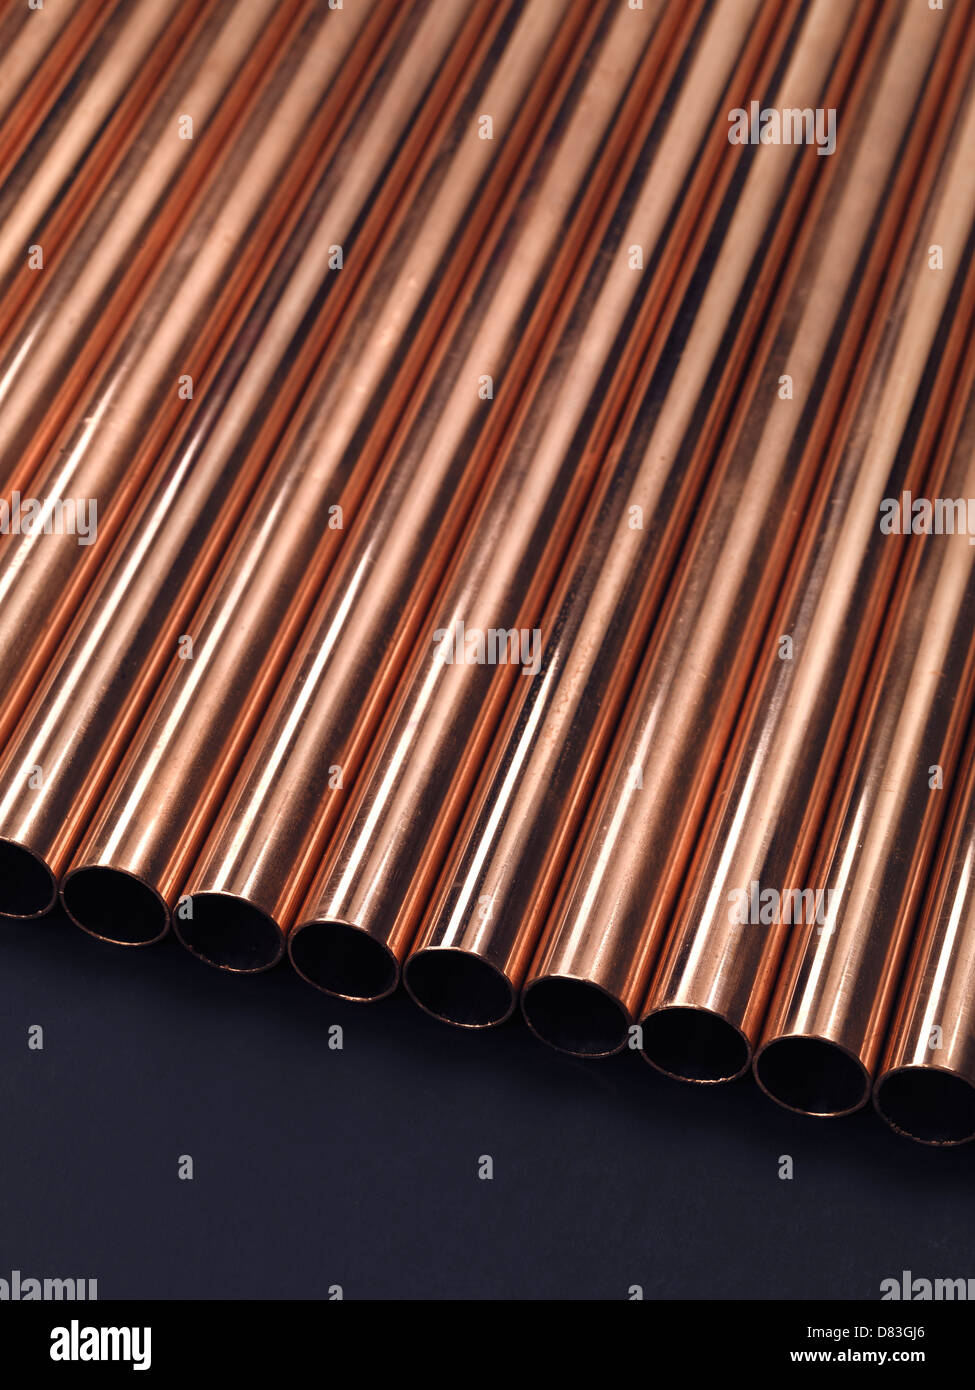 26+ Thousand Copper Tube Royalty-Free Images, Stock Photos